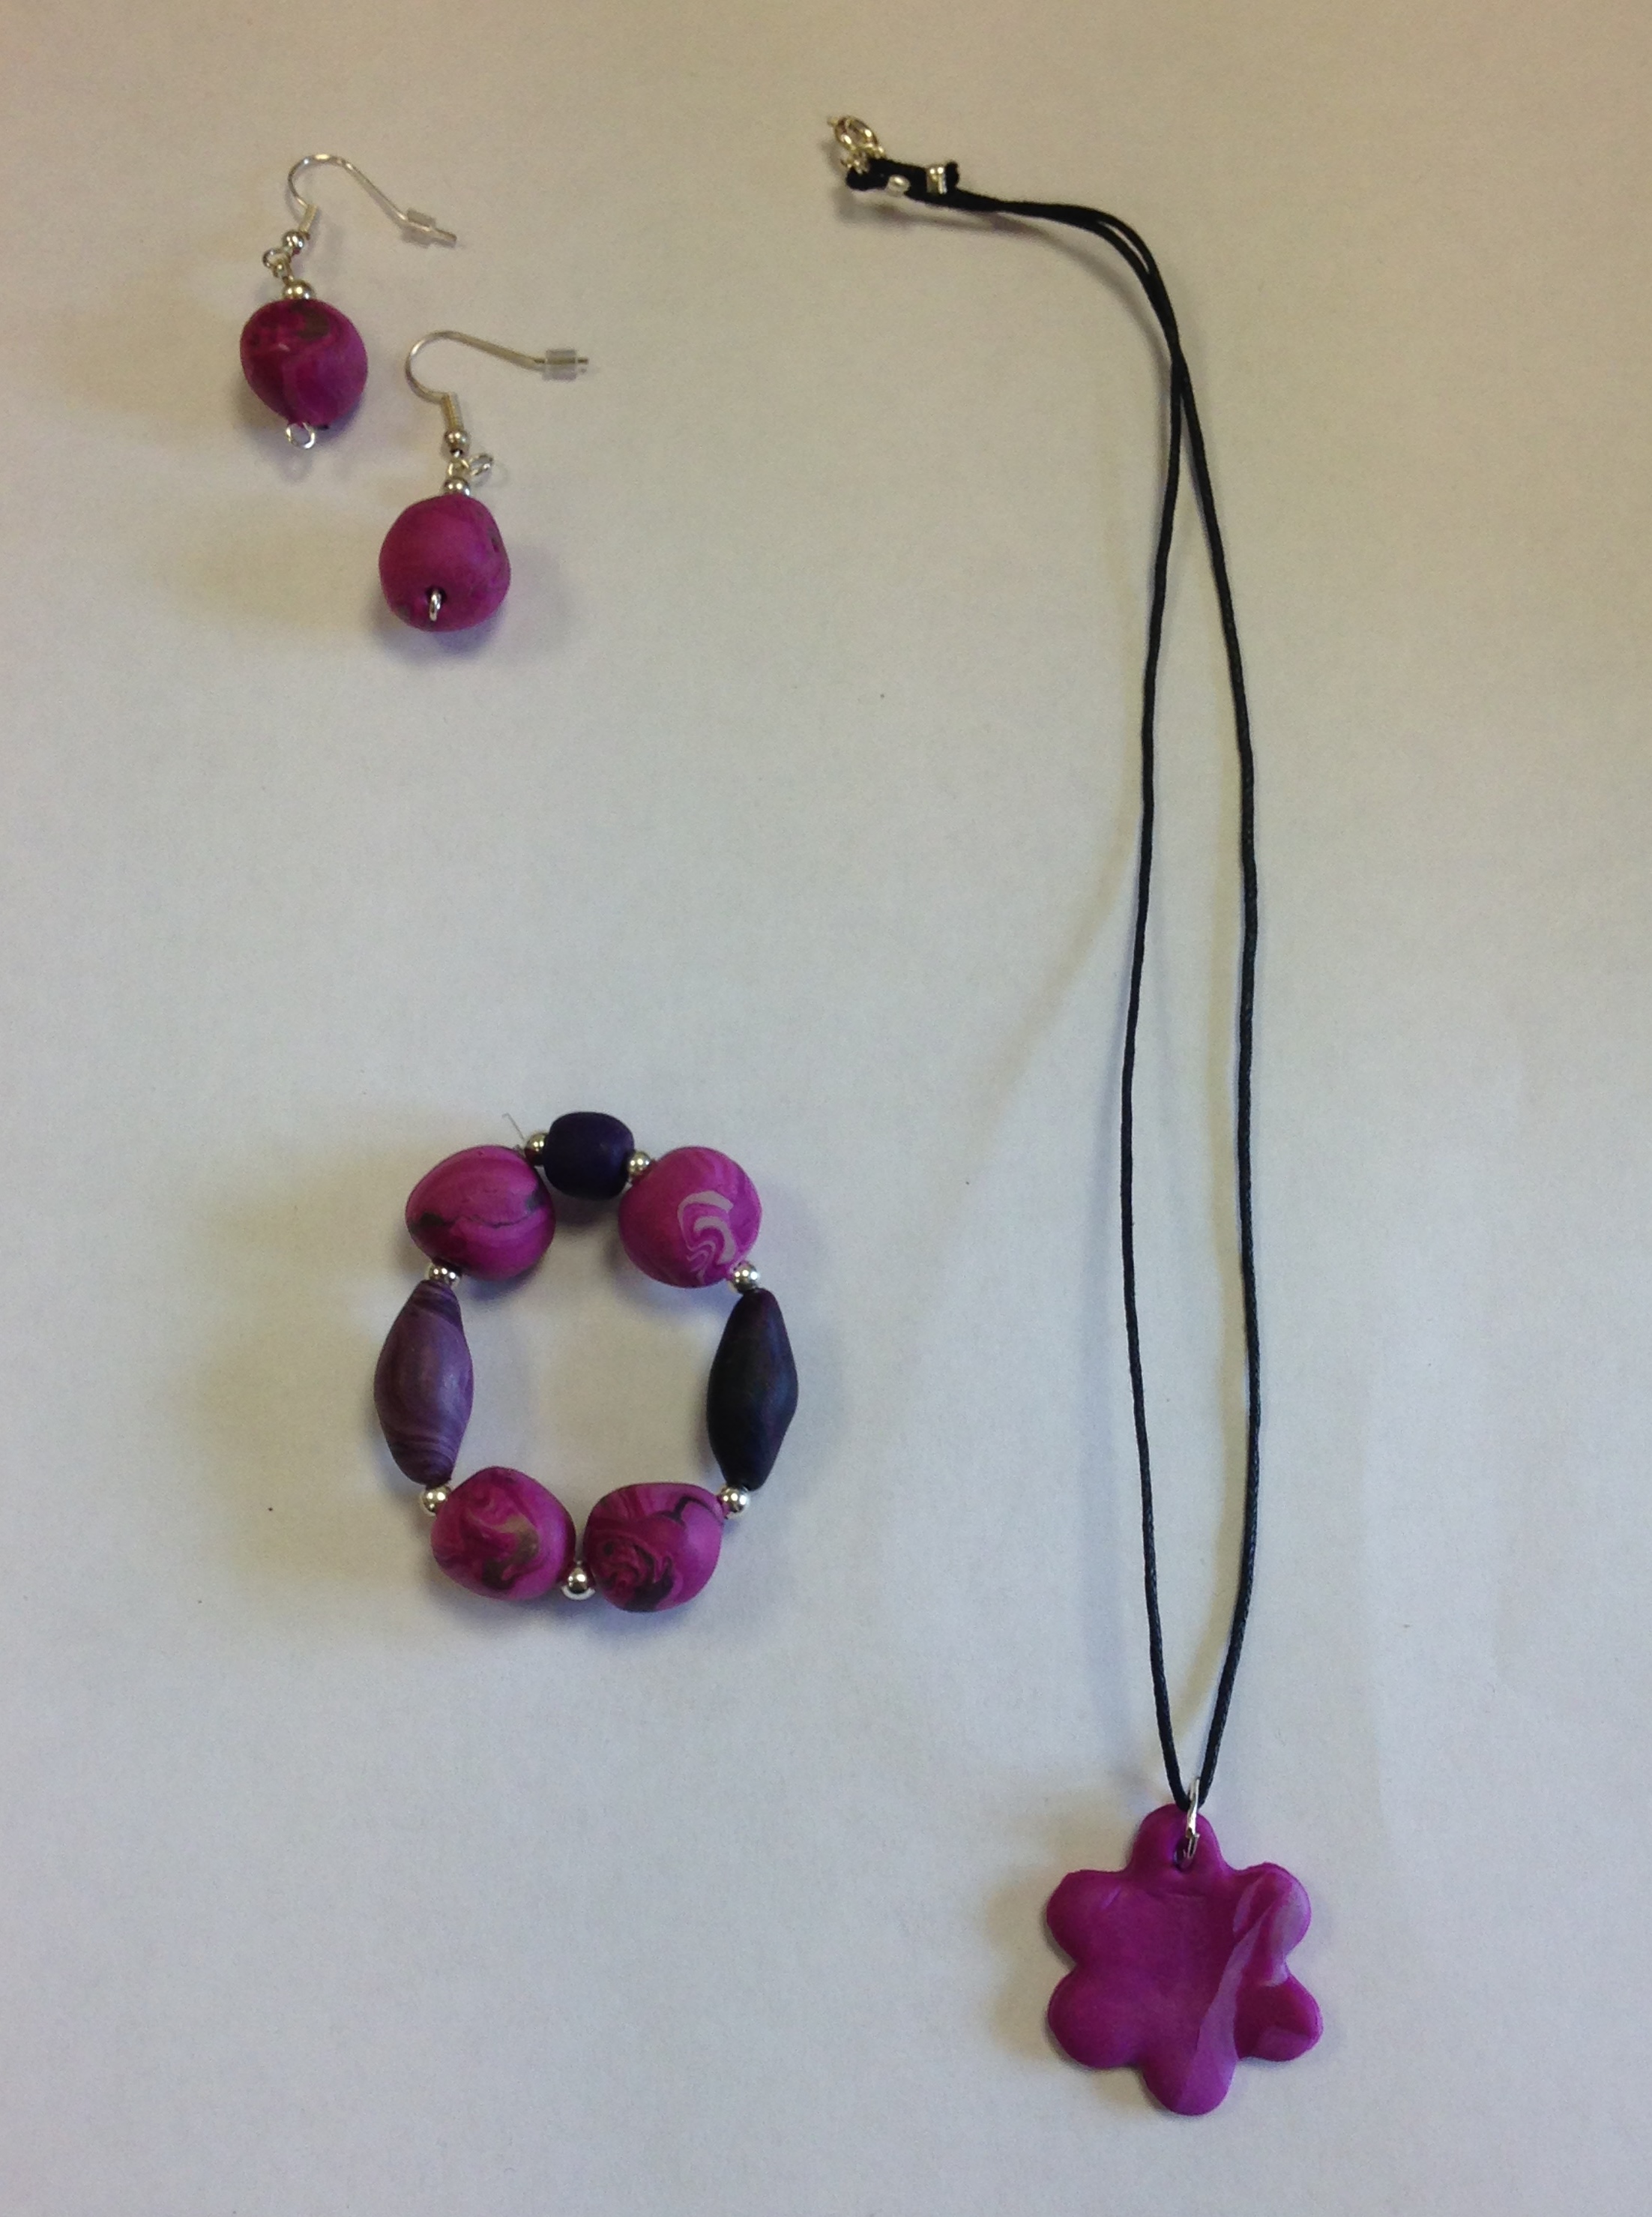 pink bracelet, earrings and a necklace with a pink flower as pendant